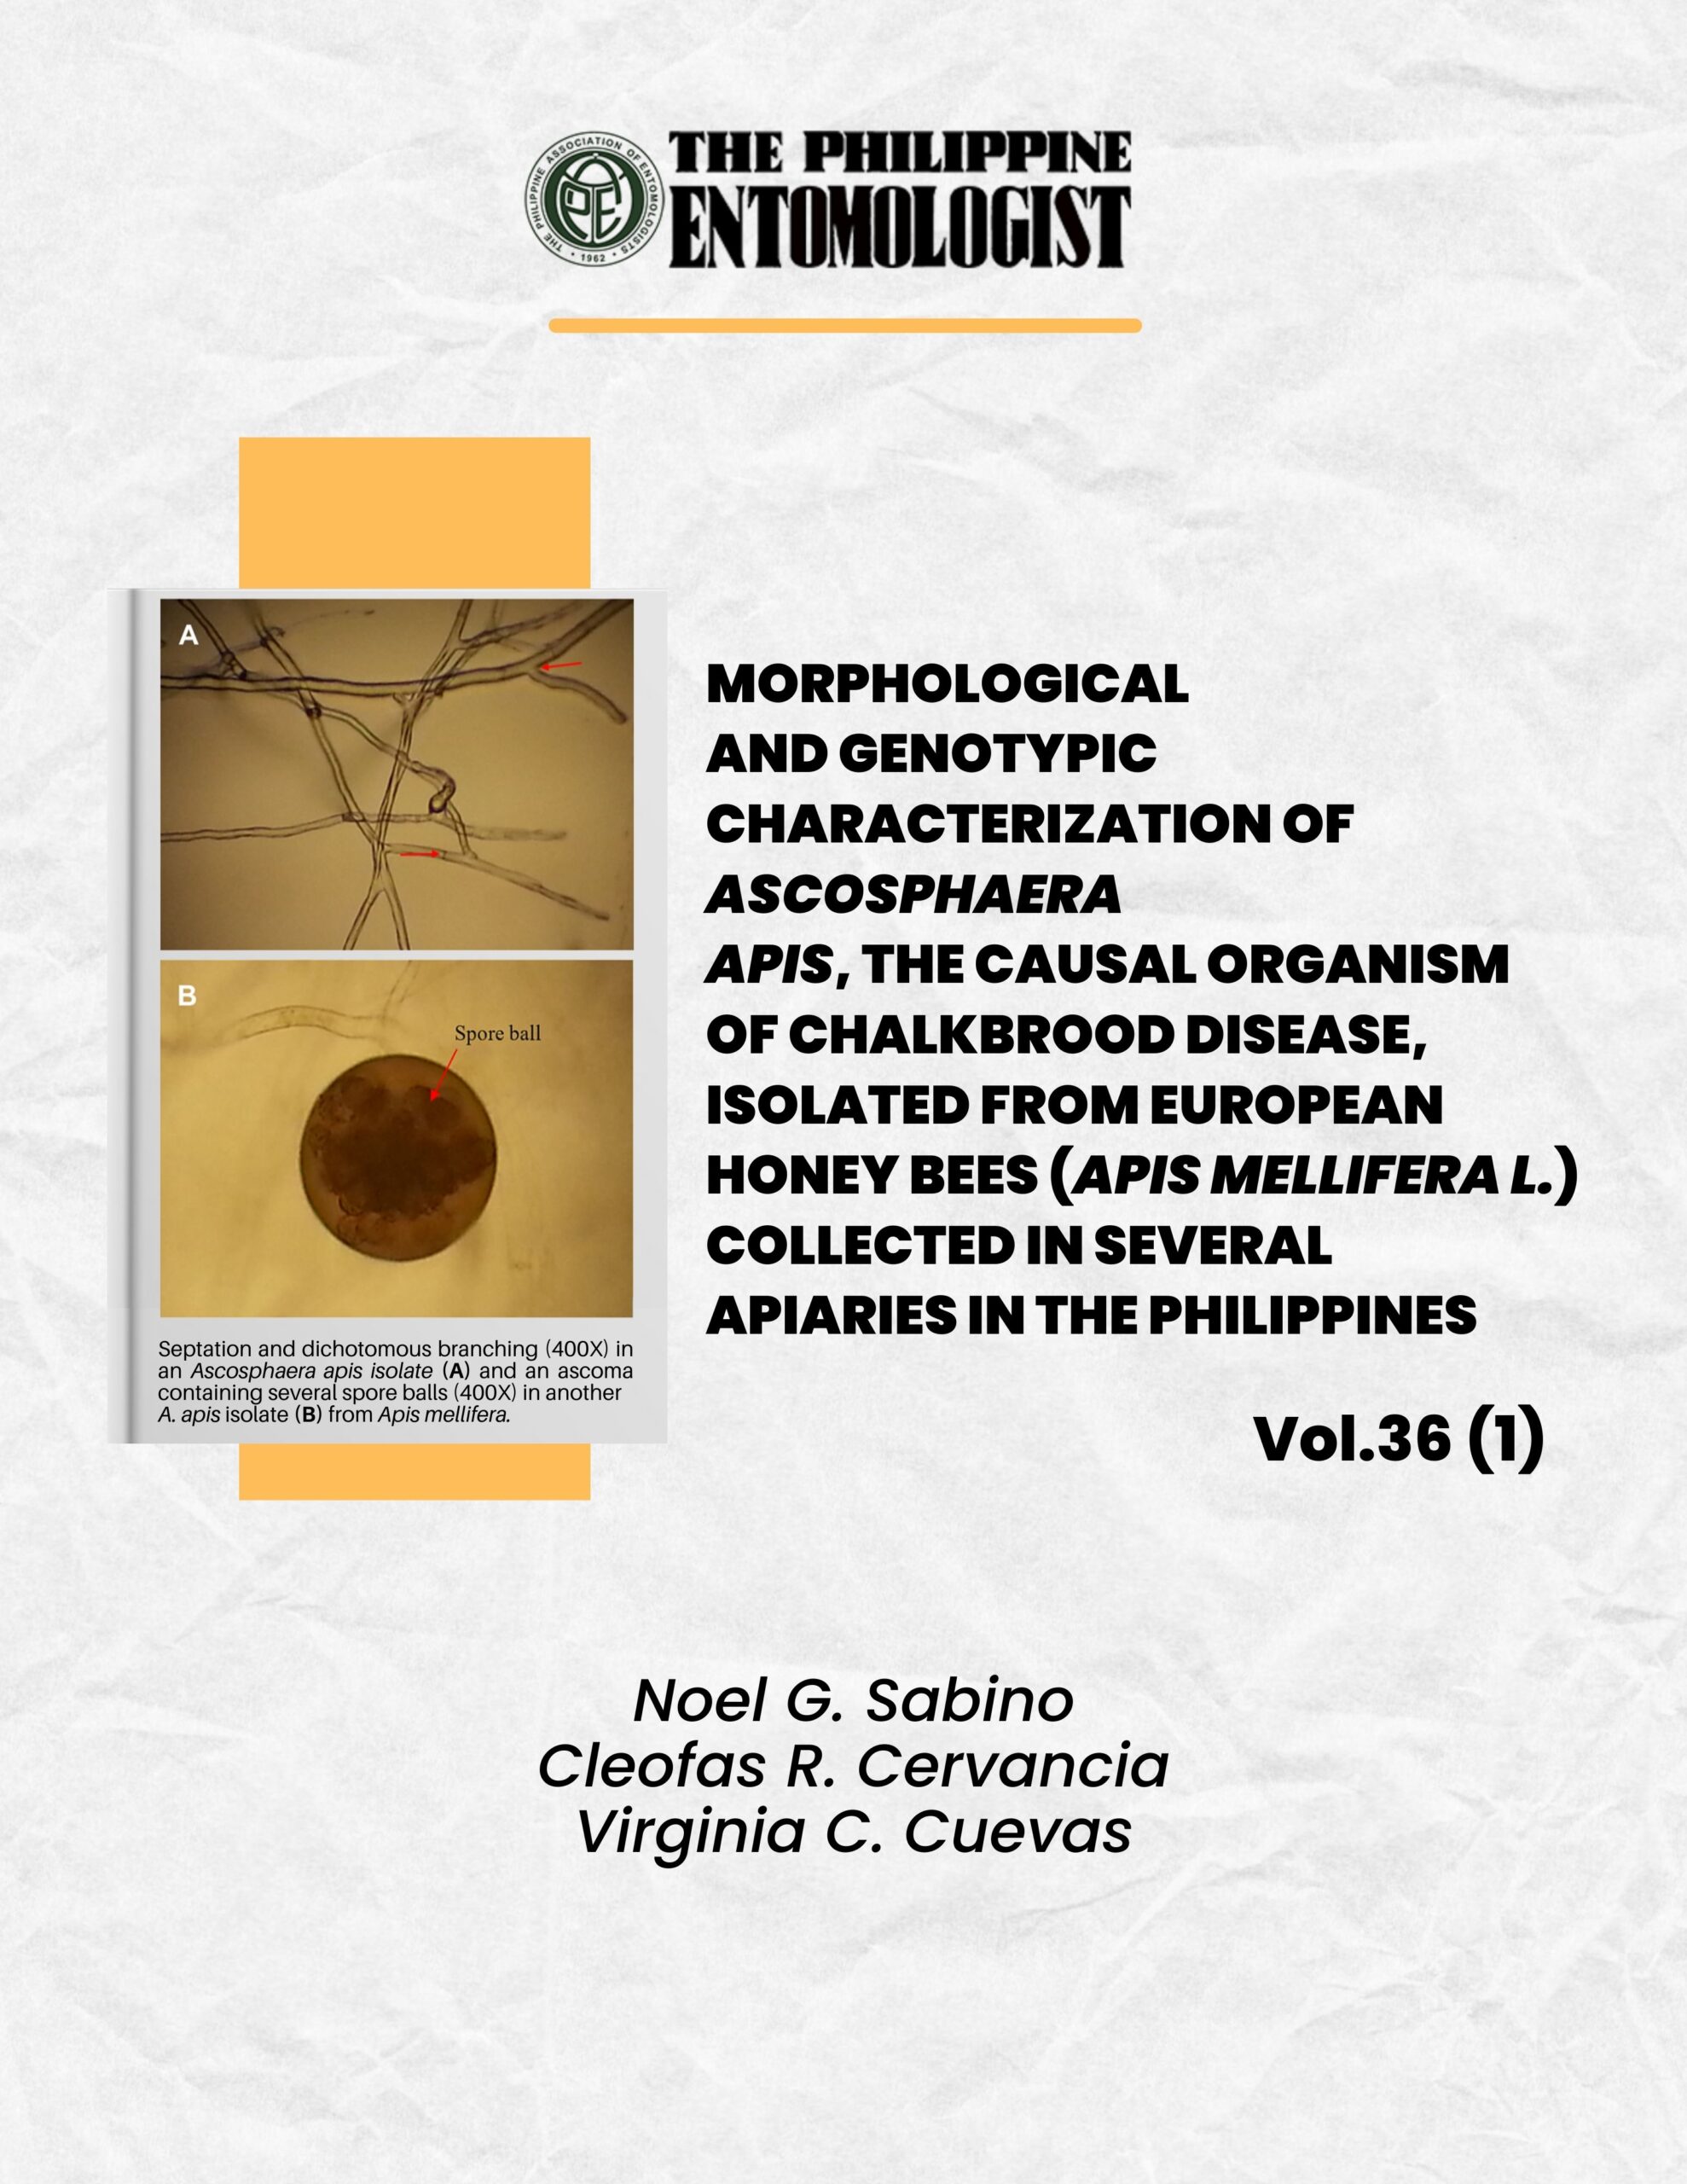 MORPHOLOGICAL AND GENOTYPIC CHARACTERIZATION OF ASCOSPHAERA APIS, THE CAUSAL ORGANISM OF CHALKBROOD DISEASE, ISOLATED FROM EUROPEAN HONEY BEES (APIS MELLIFERA L.) COLLECTED IN SEVERAL APIARIES IN THE PHILIPPINES